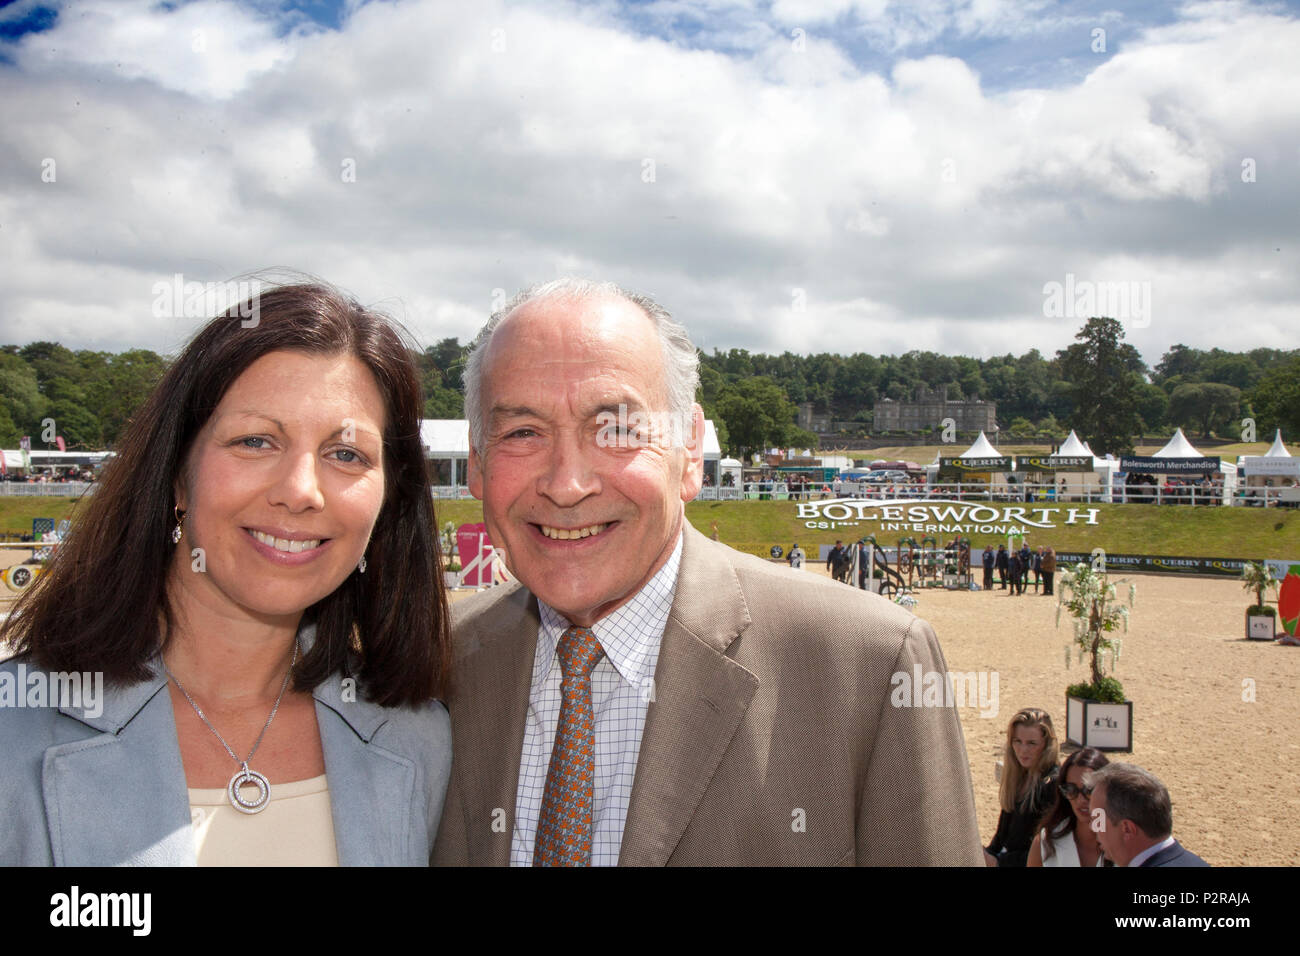 Bolesworth, Cheshire, UK. 16th Jun, 2018. Alastair Stewart OBE is all  smiles with Nina Barbour the Show Director at The Equerry Bolesworth  International Horse Show at Bolesworth Castle in the Cheshire countryside.